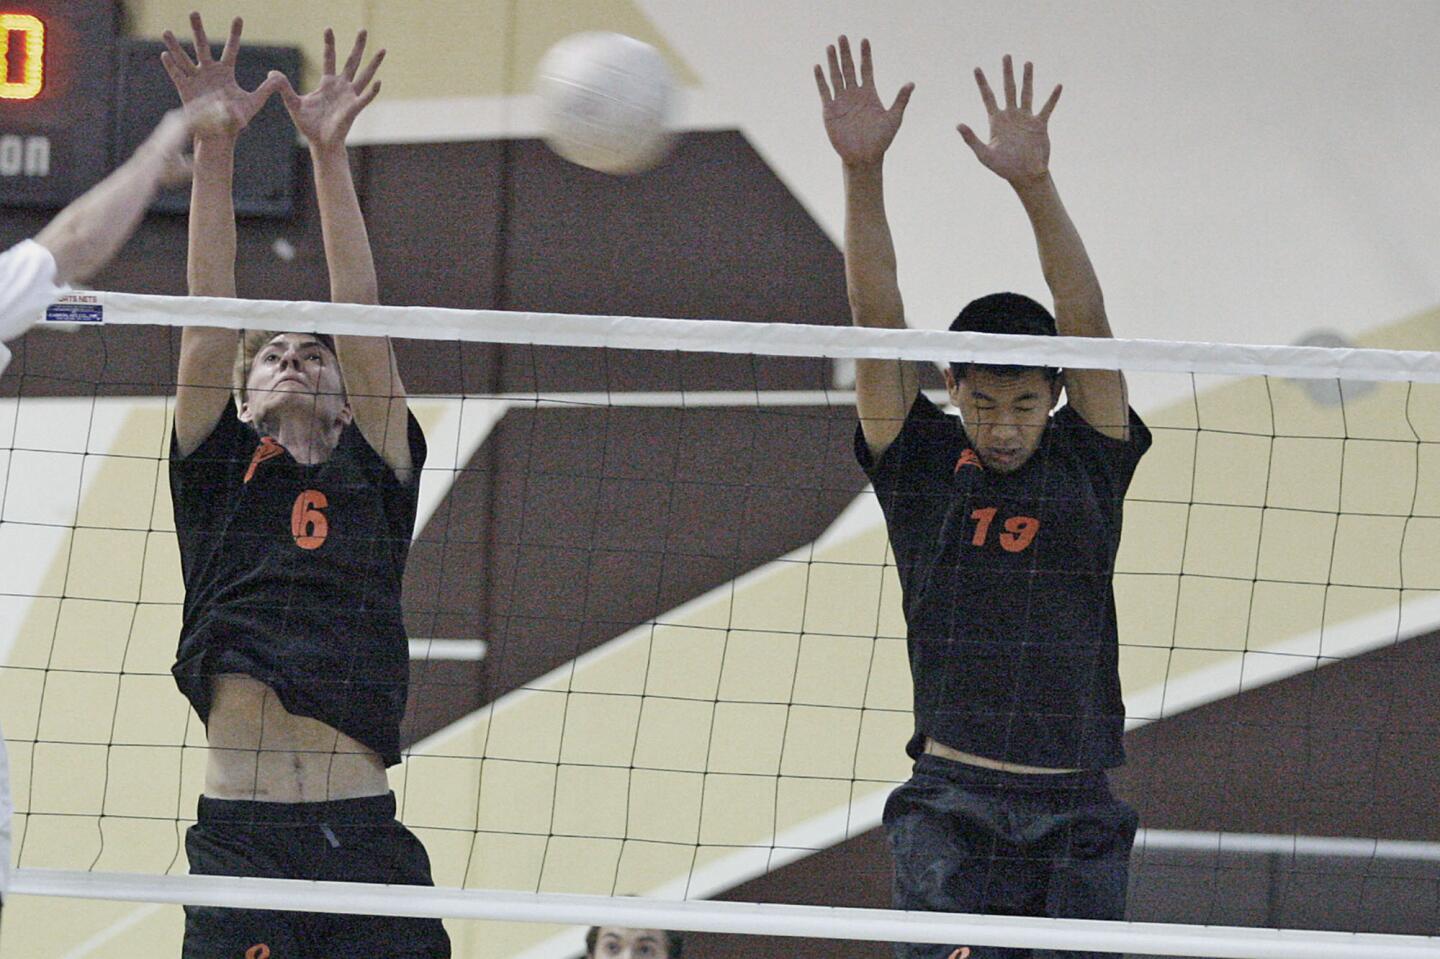 South Pasadena's David Barker, left, and Jason Qiu try to block a spike but miss during a match against St. Francis at St. Francis High School in La Canada on Tuesday, March 26, 2013.